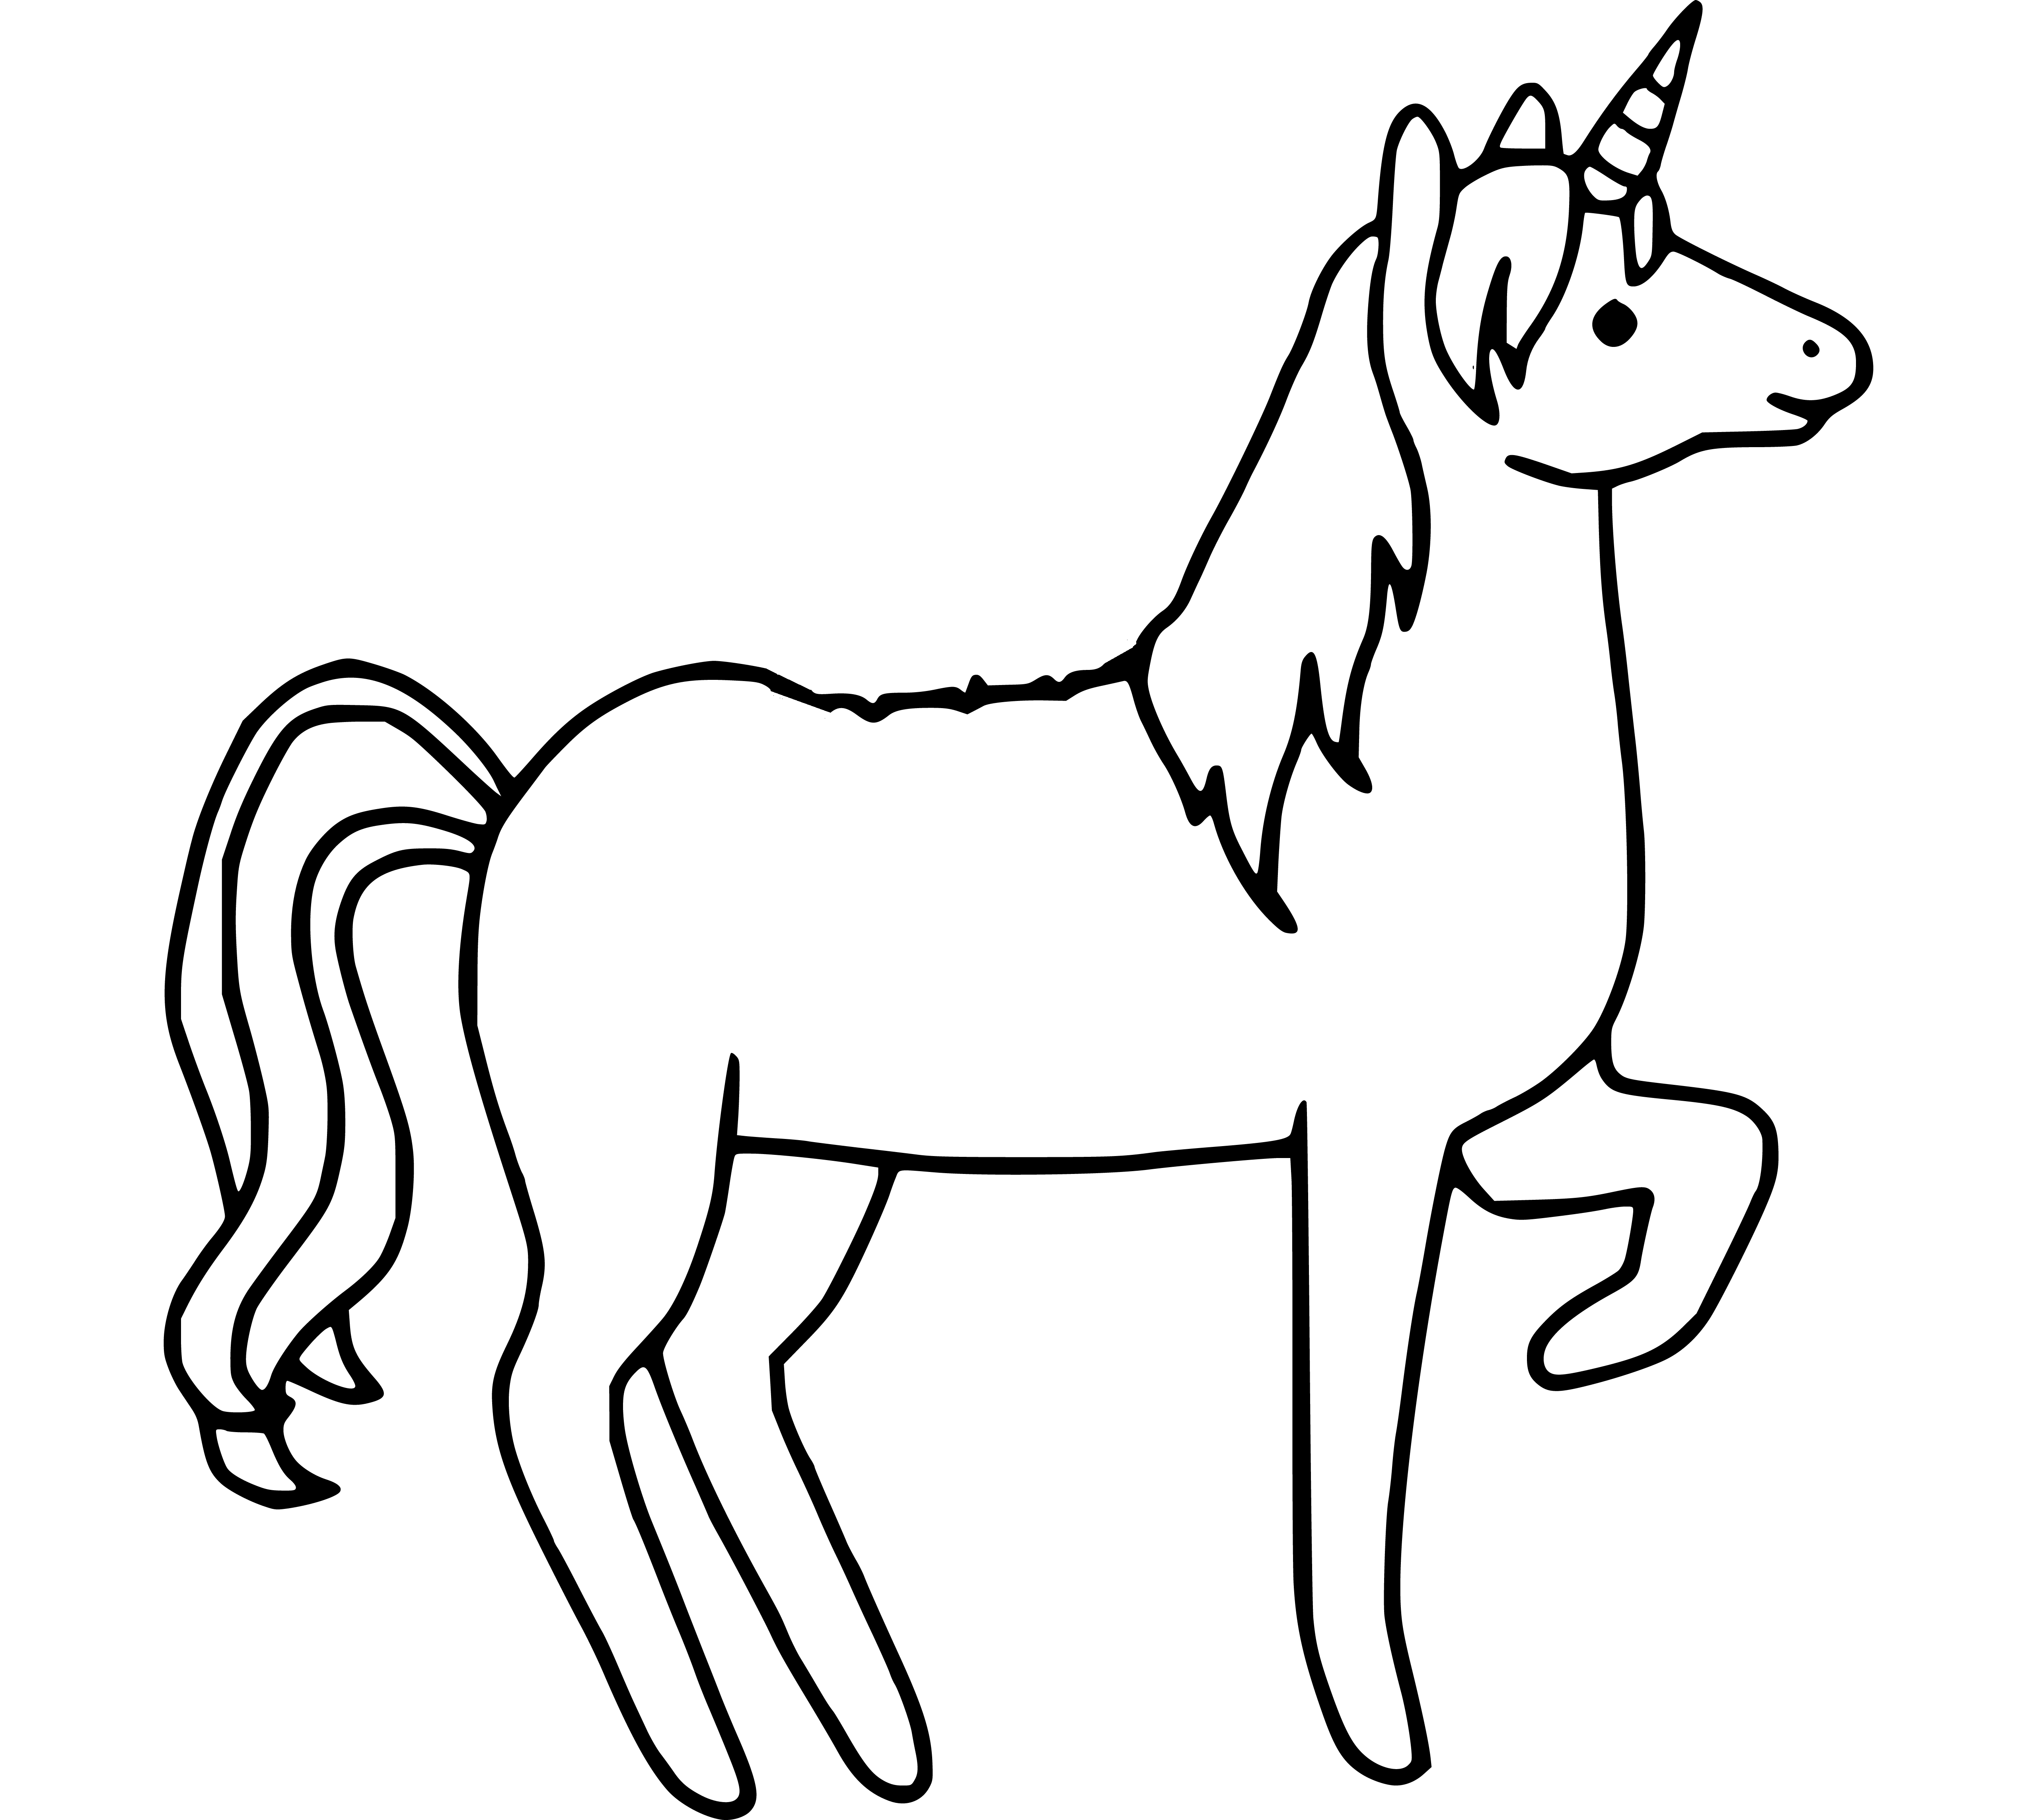 Simple Unicorn Coloring Page Easy for Kids - SheetalColor.com